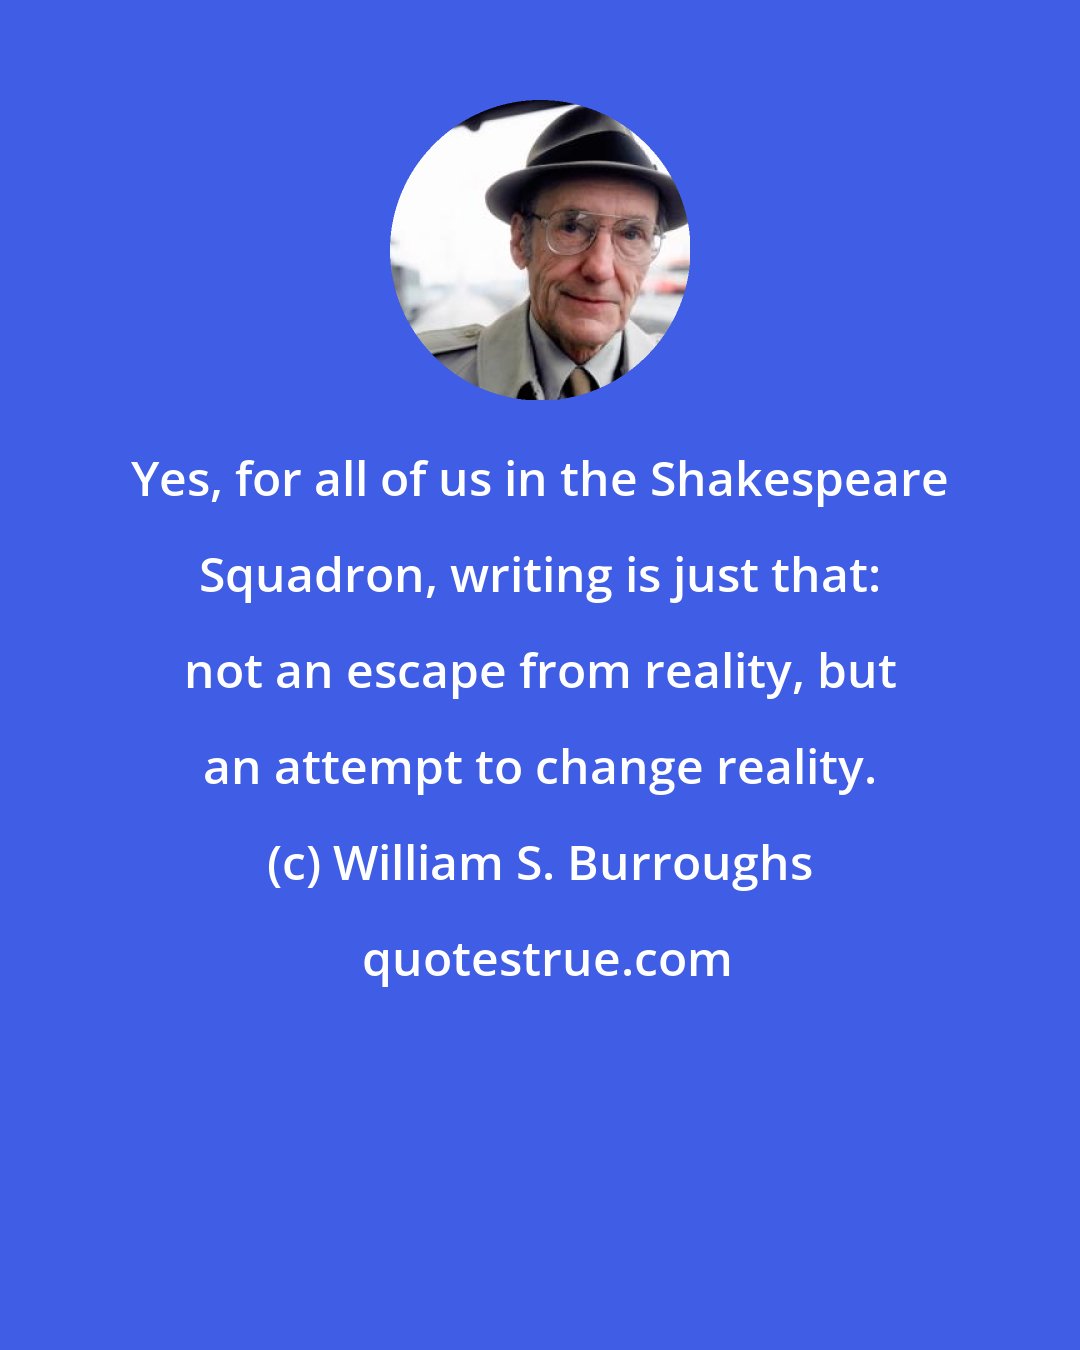 William S. Burroughs: Yes, for all of us in the Shakespeare Squadron, writing is just that: not an escape from reality, but an attempt to change reality.